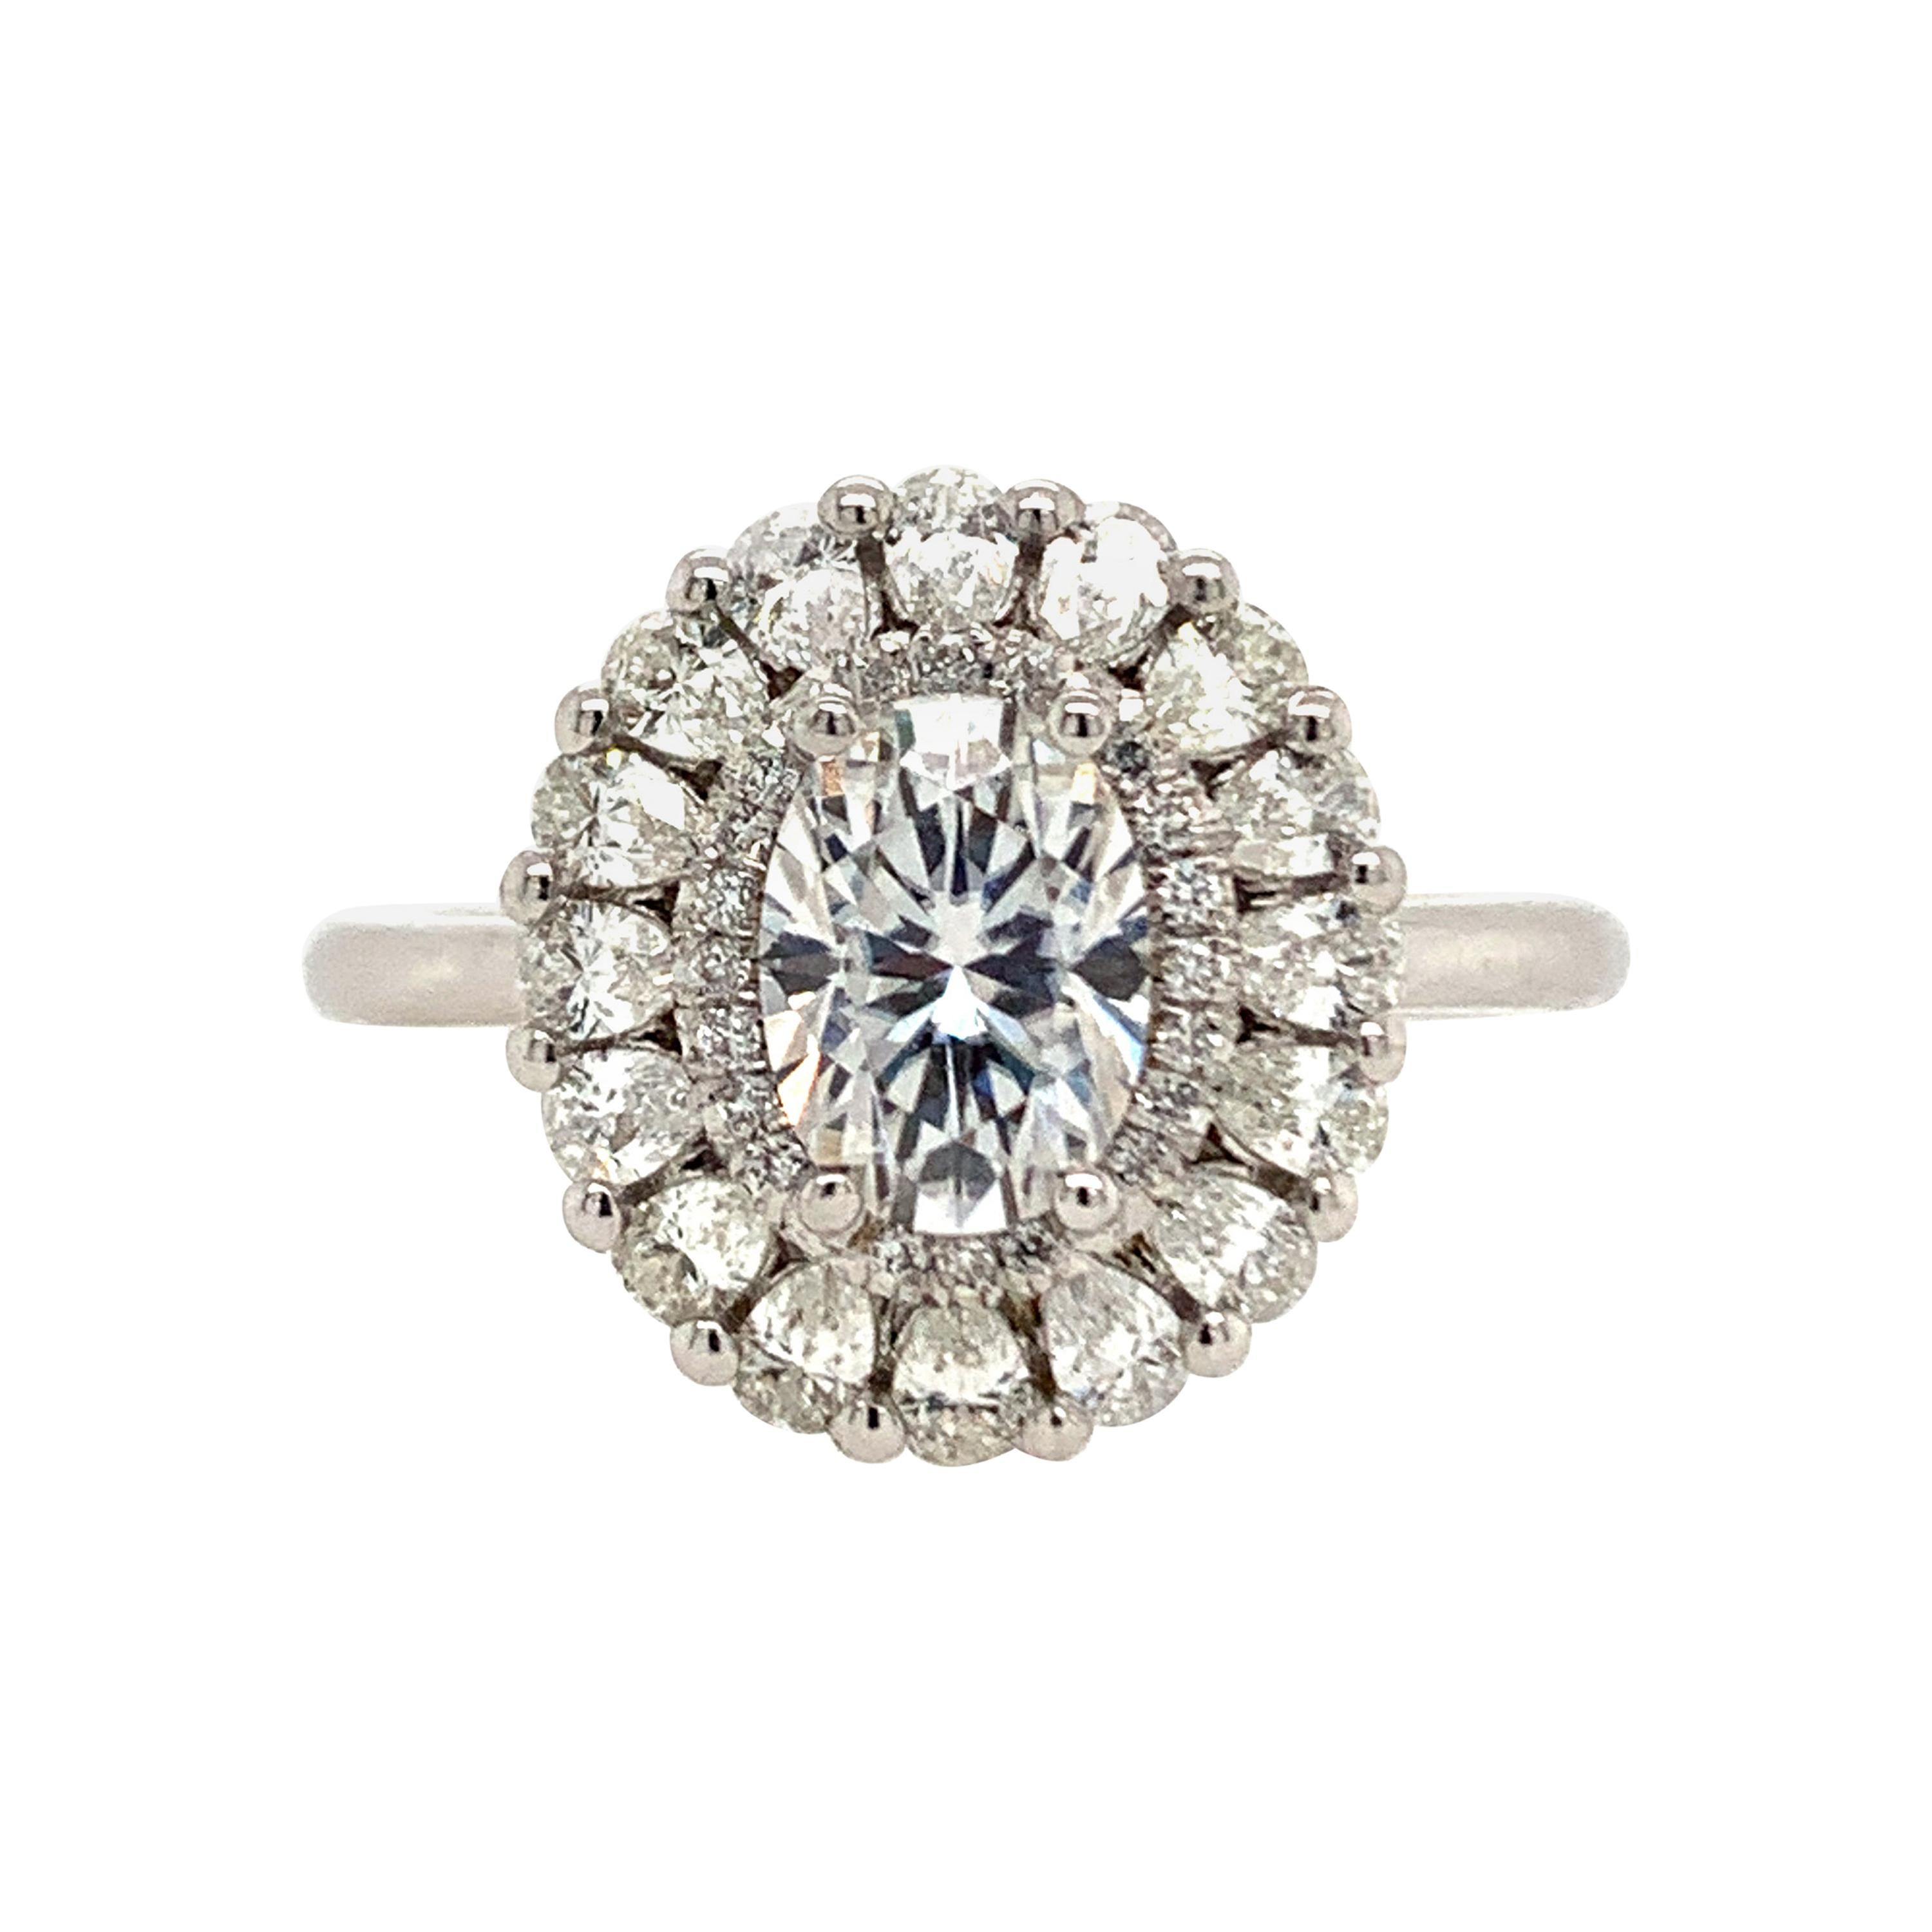 1.42 Carat Oval Diamond Cocktail Ring For Sale